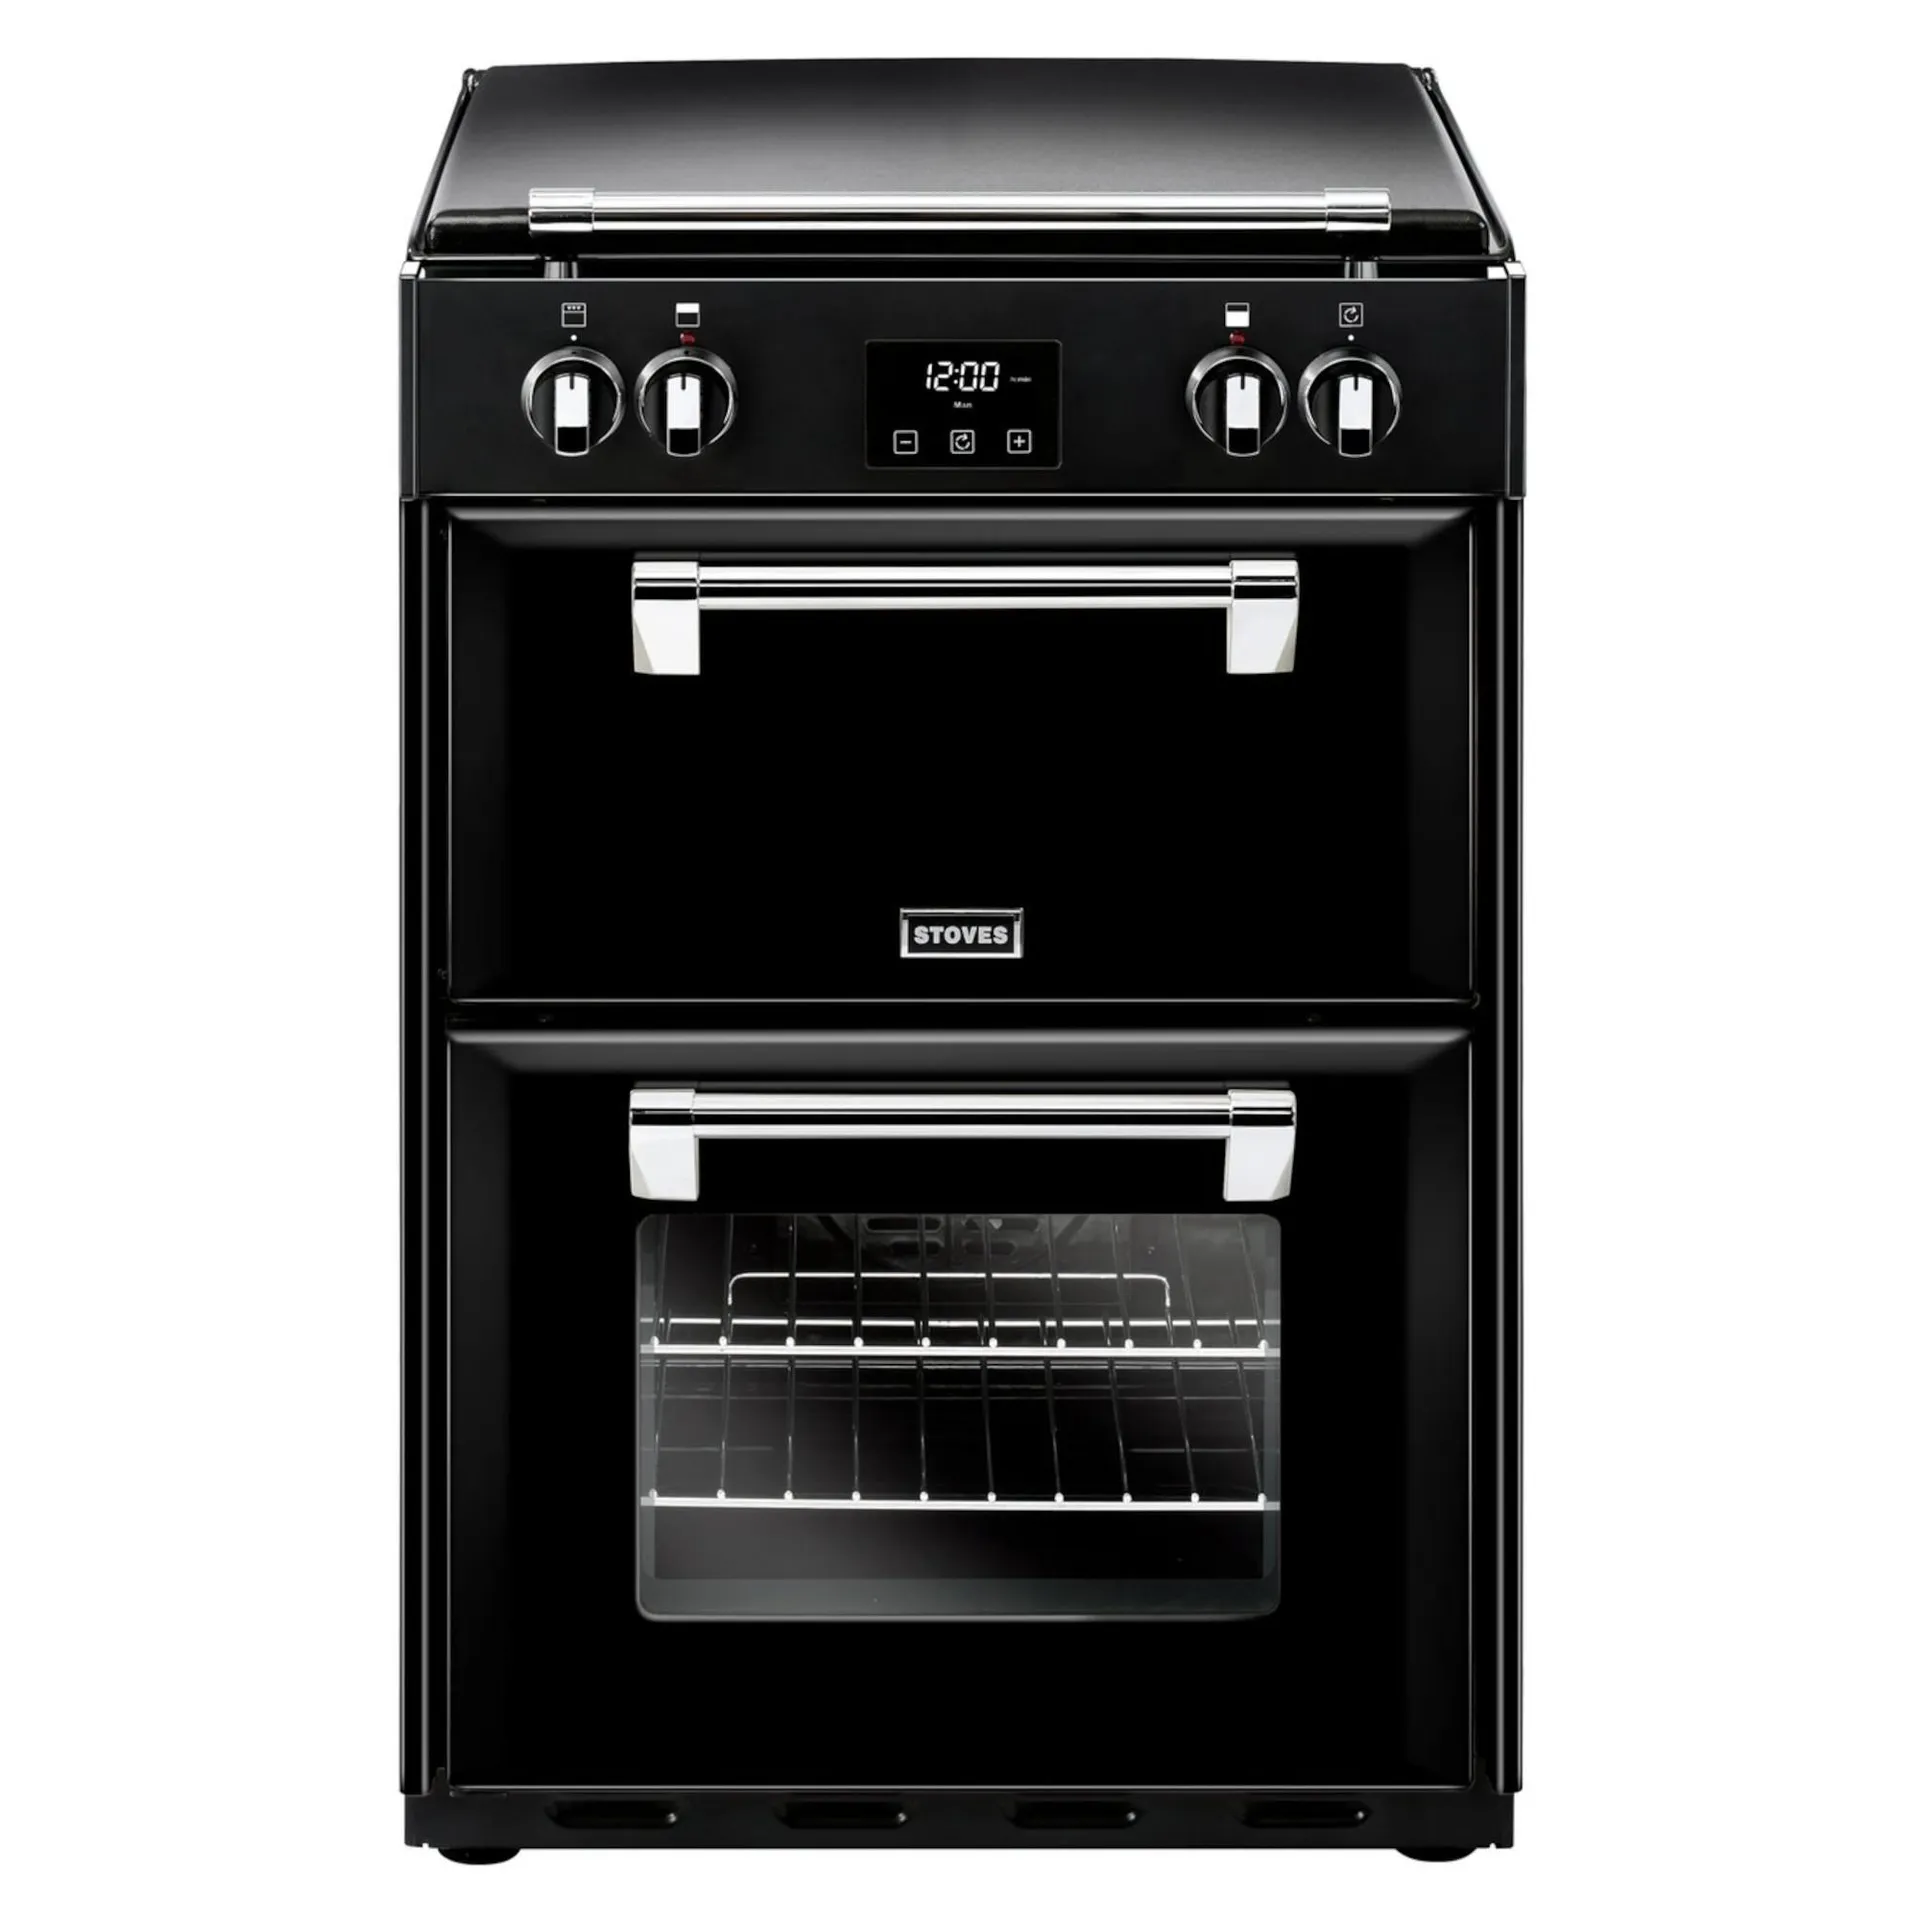 Stoves RICH600EIBLK Richmond 600 Electric Cooker with Induction Hob - Black